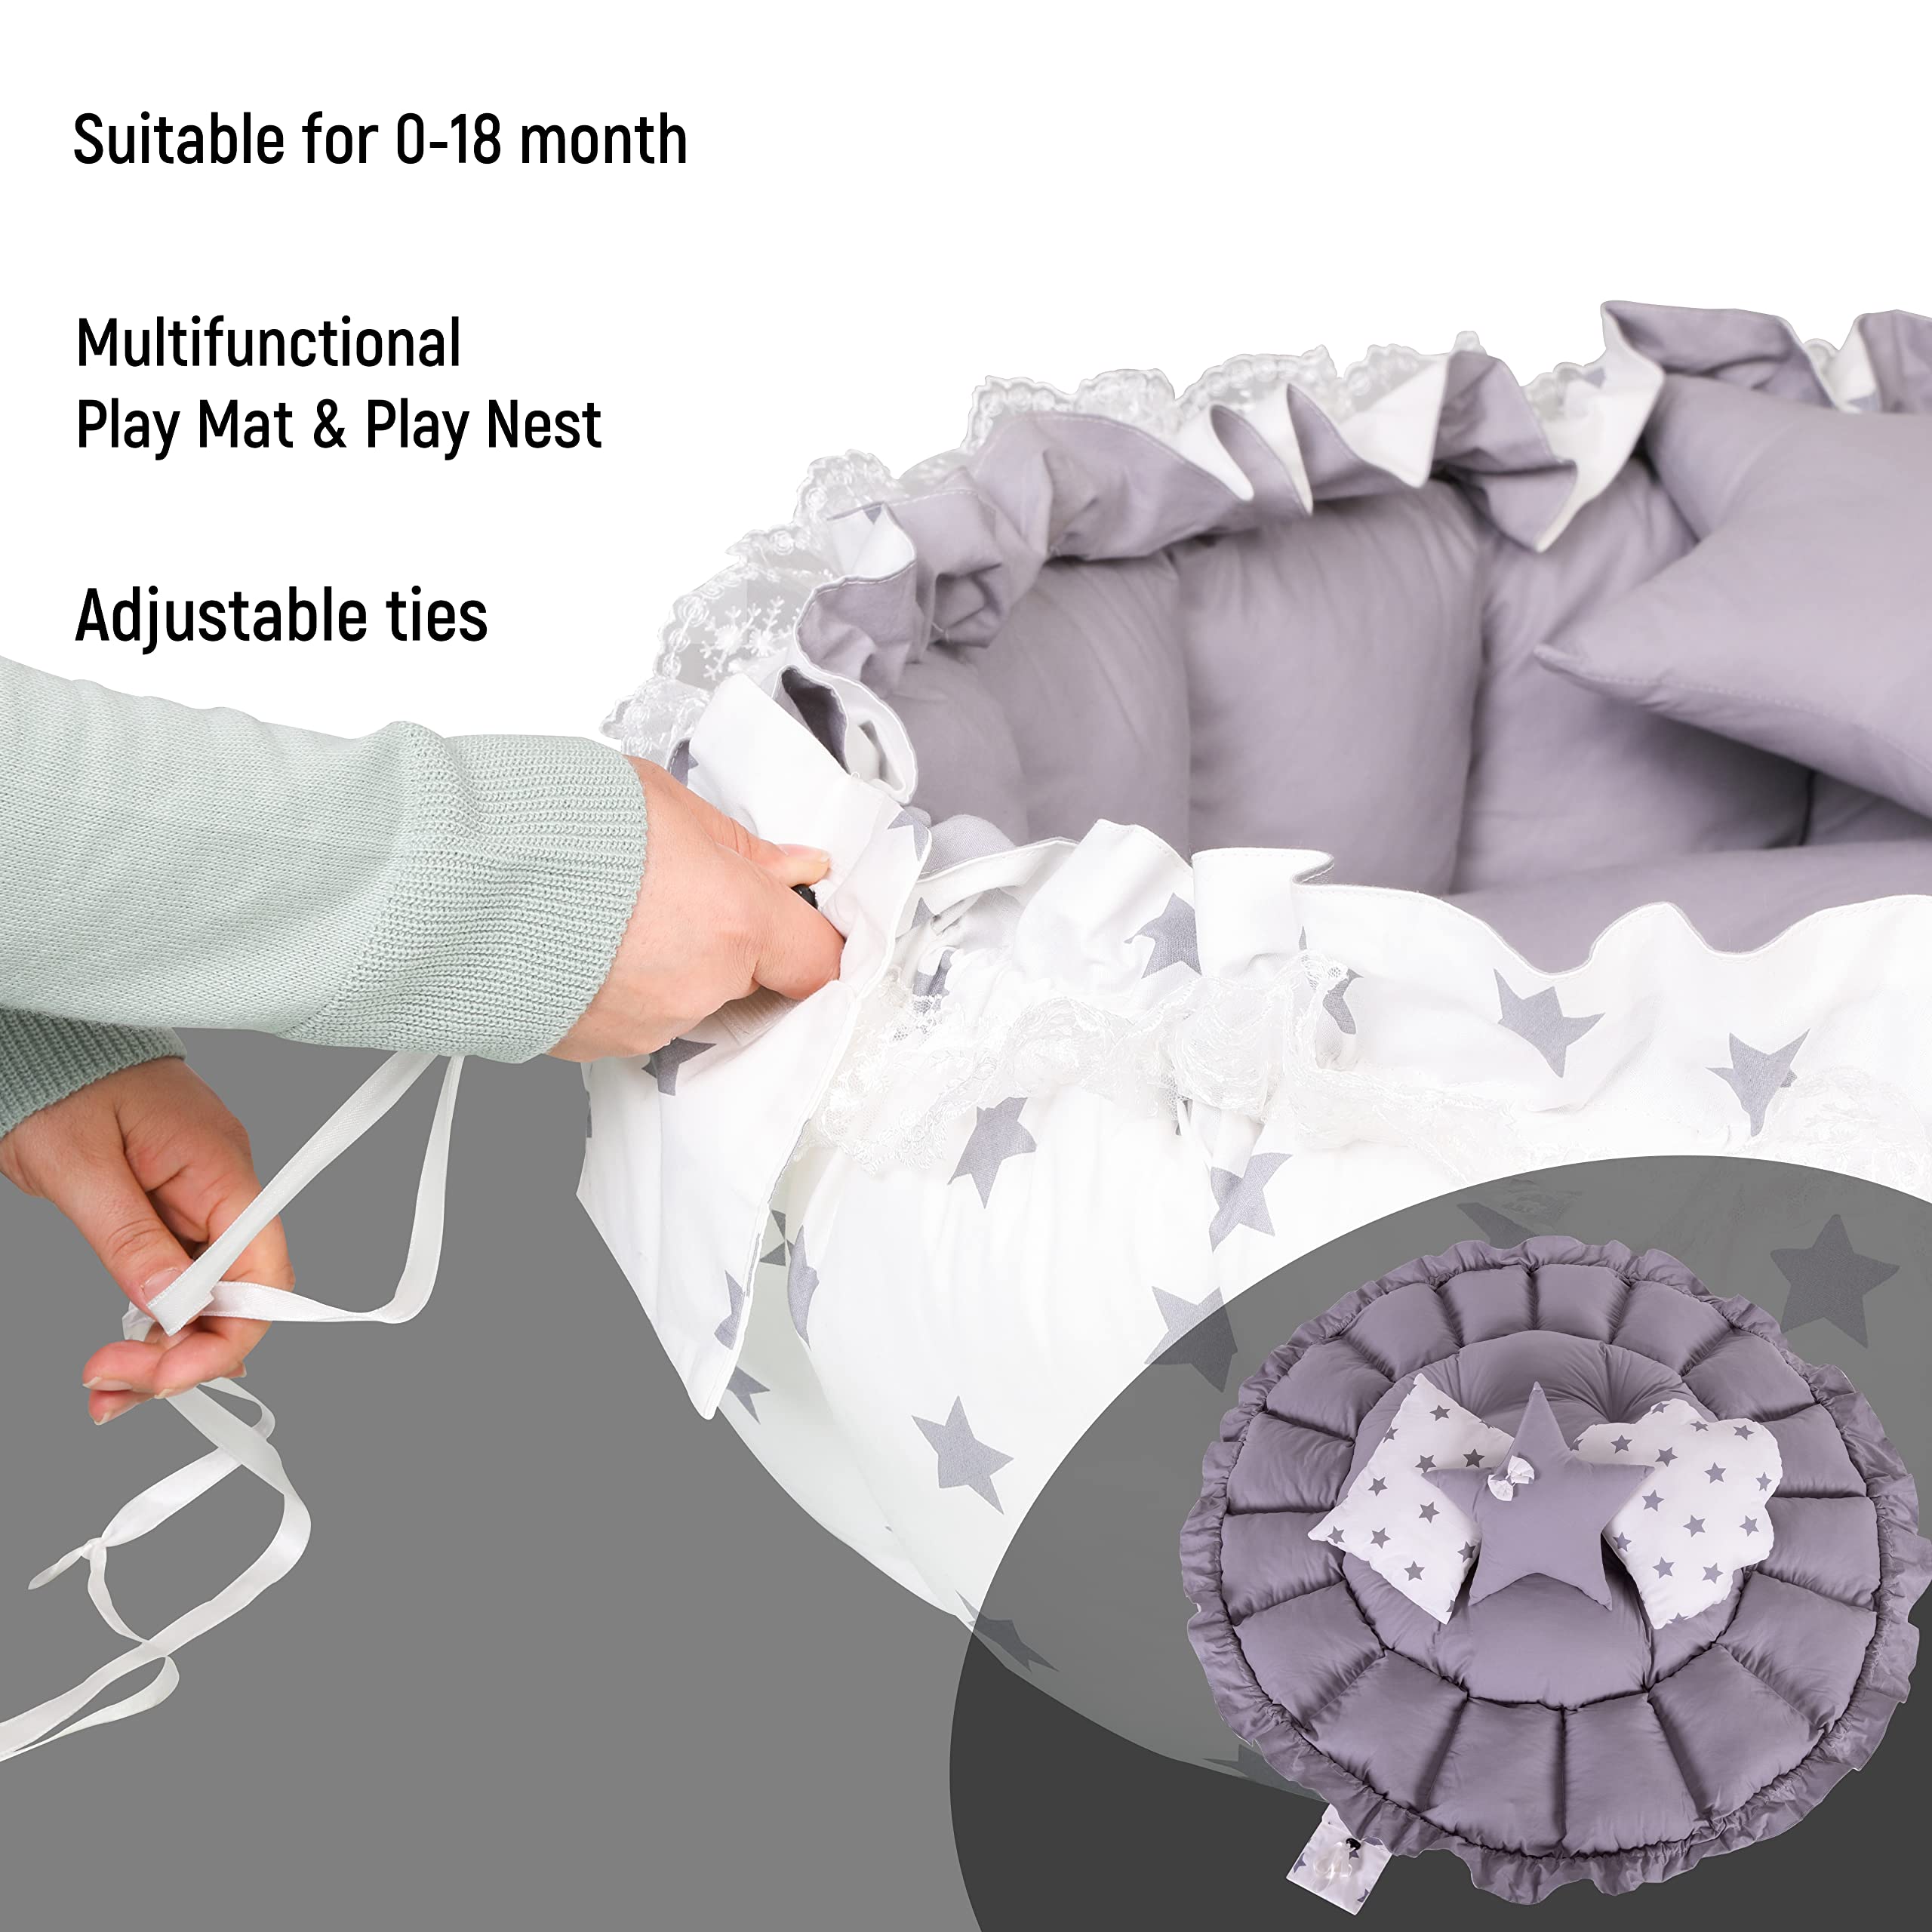 MottoKids 2-in-1 Play Mat from Baby to Toddler, Pet Cushion, Thick & Convertible, Floor Cushion for Toddler, Play Mat, Cotton & Breathable Machine Washable (Grey)